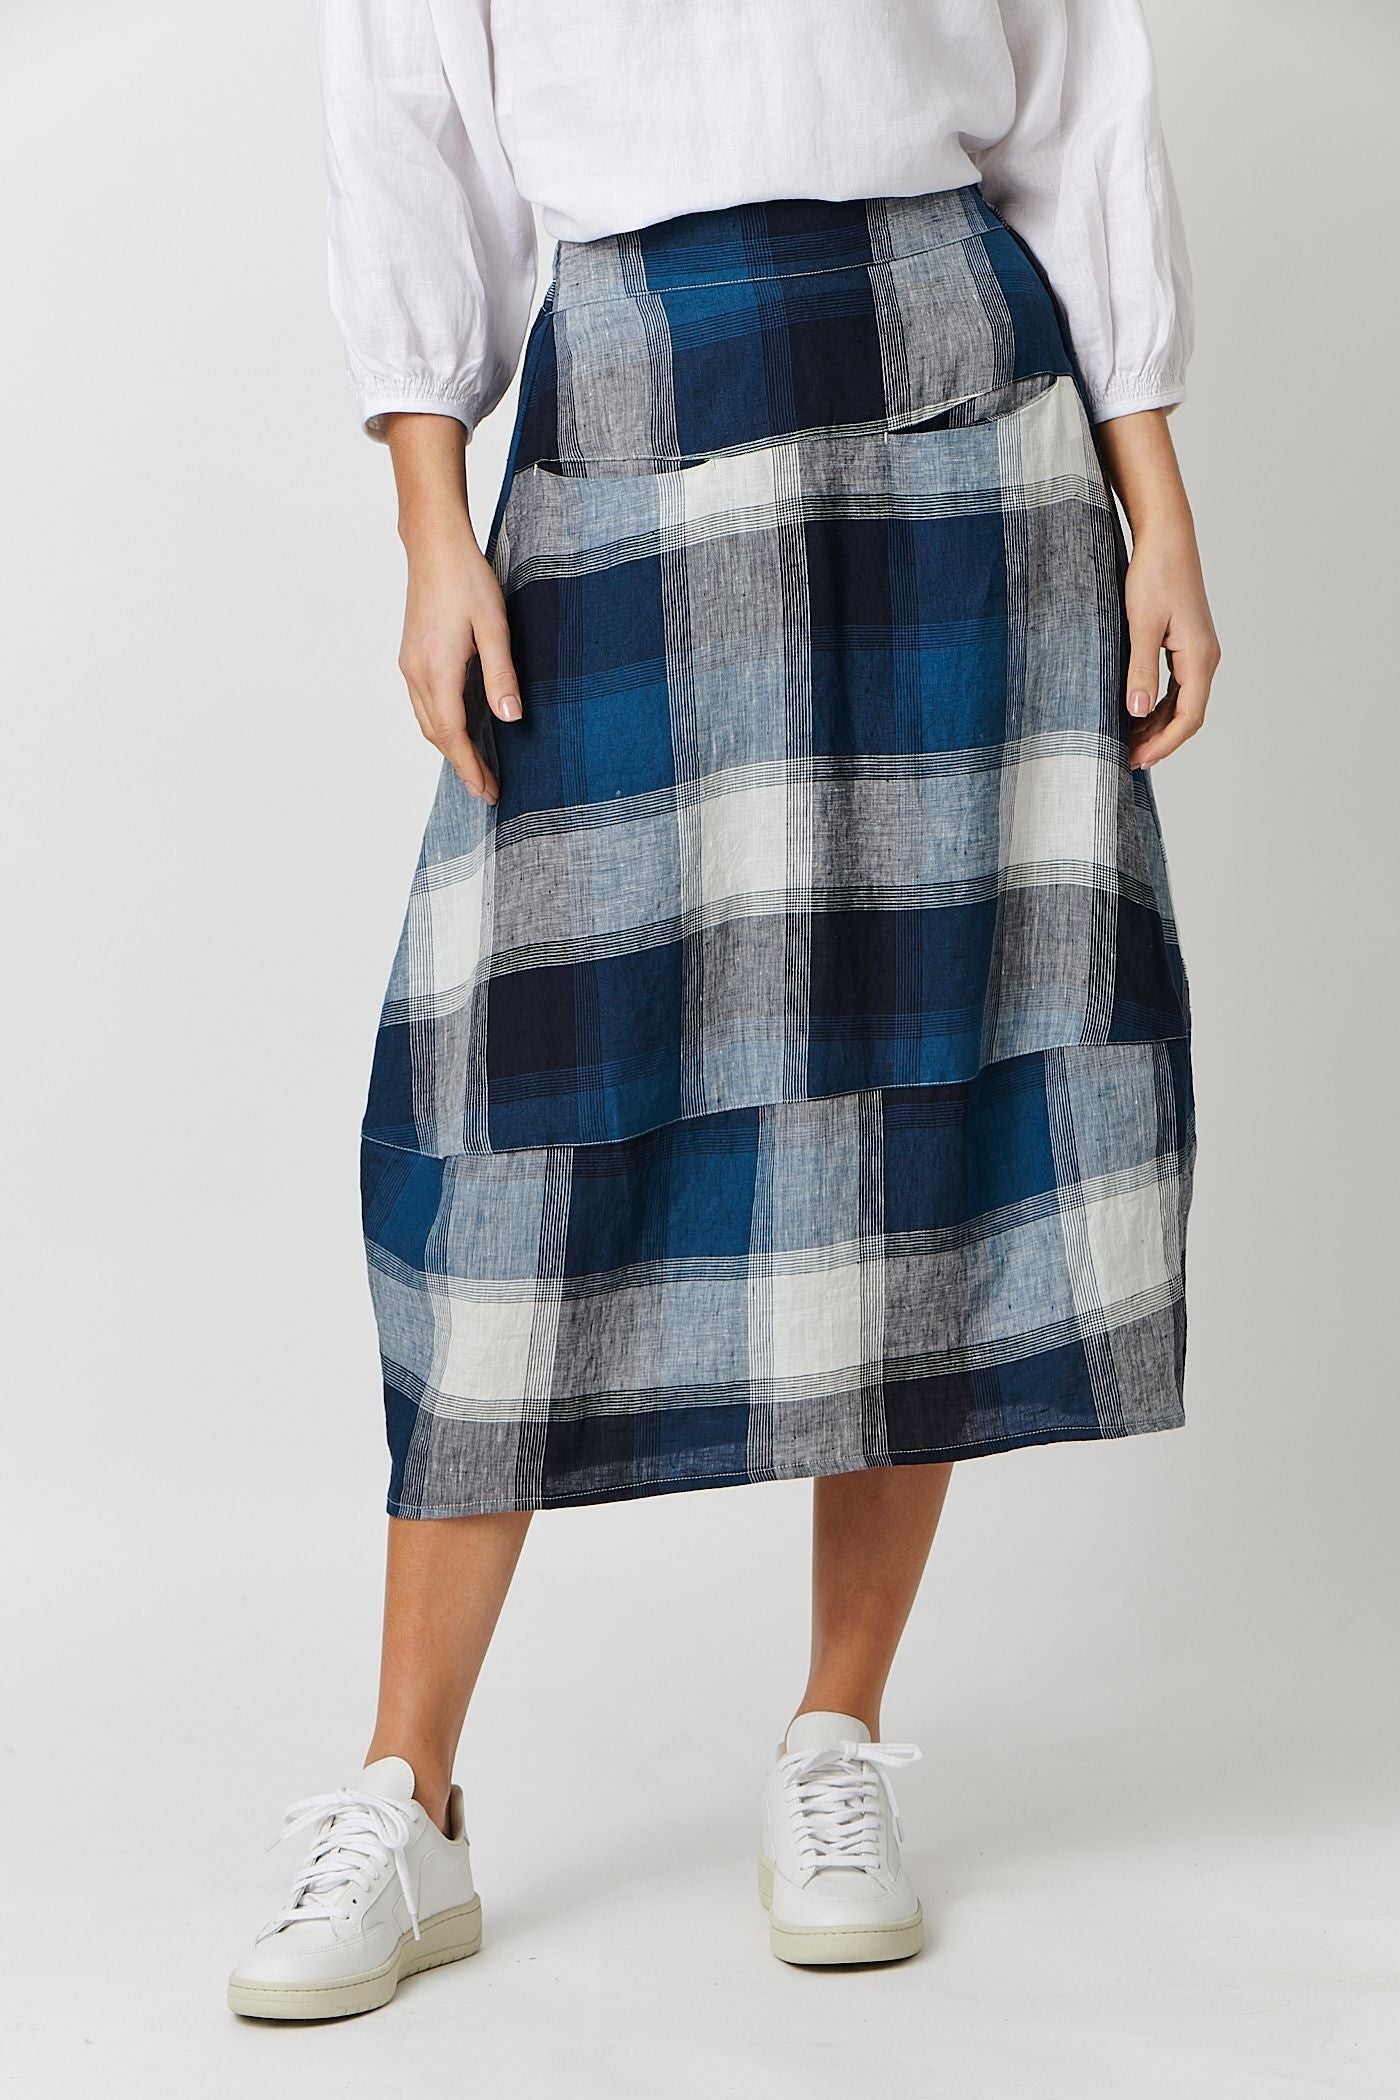 Naturals by O & J Balloon Style Skirt in Lagoon Plaid